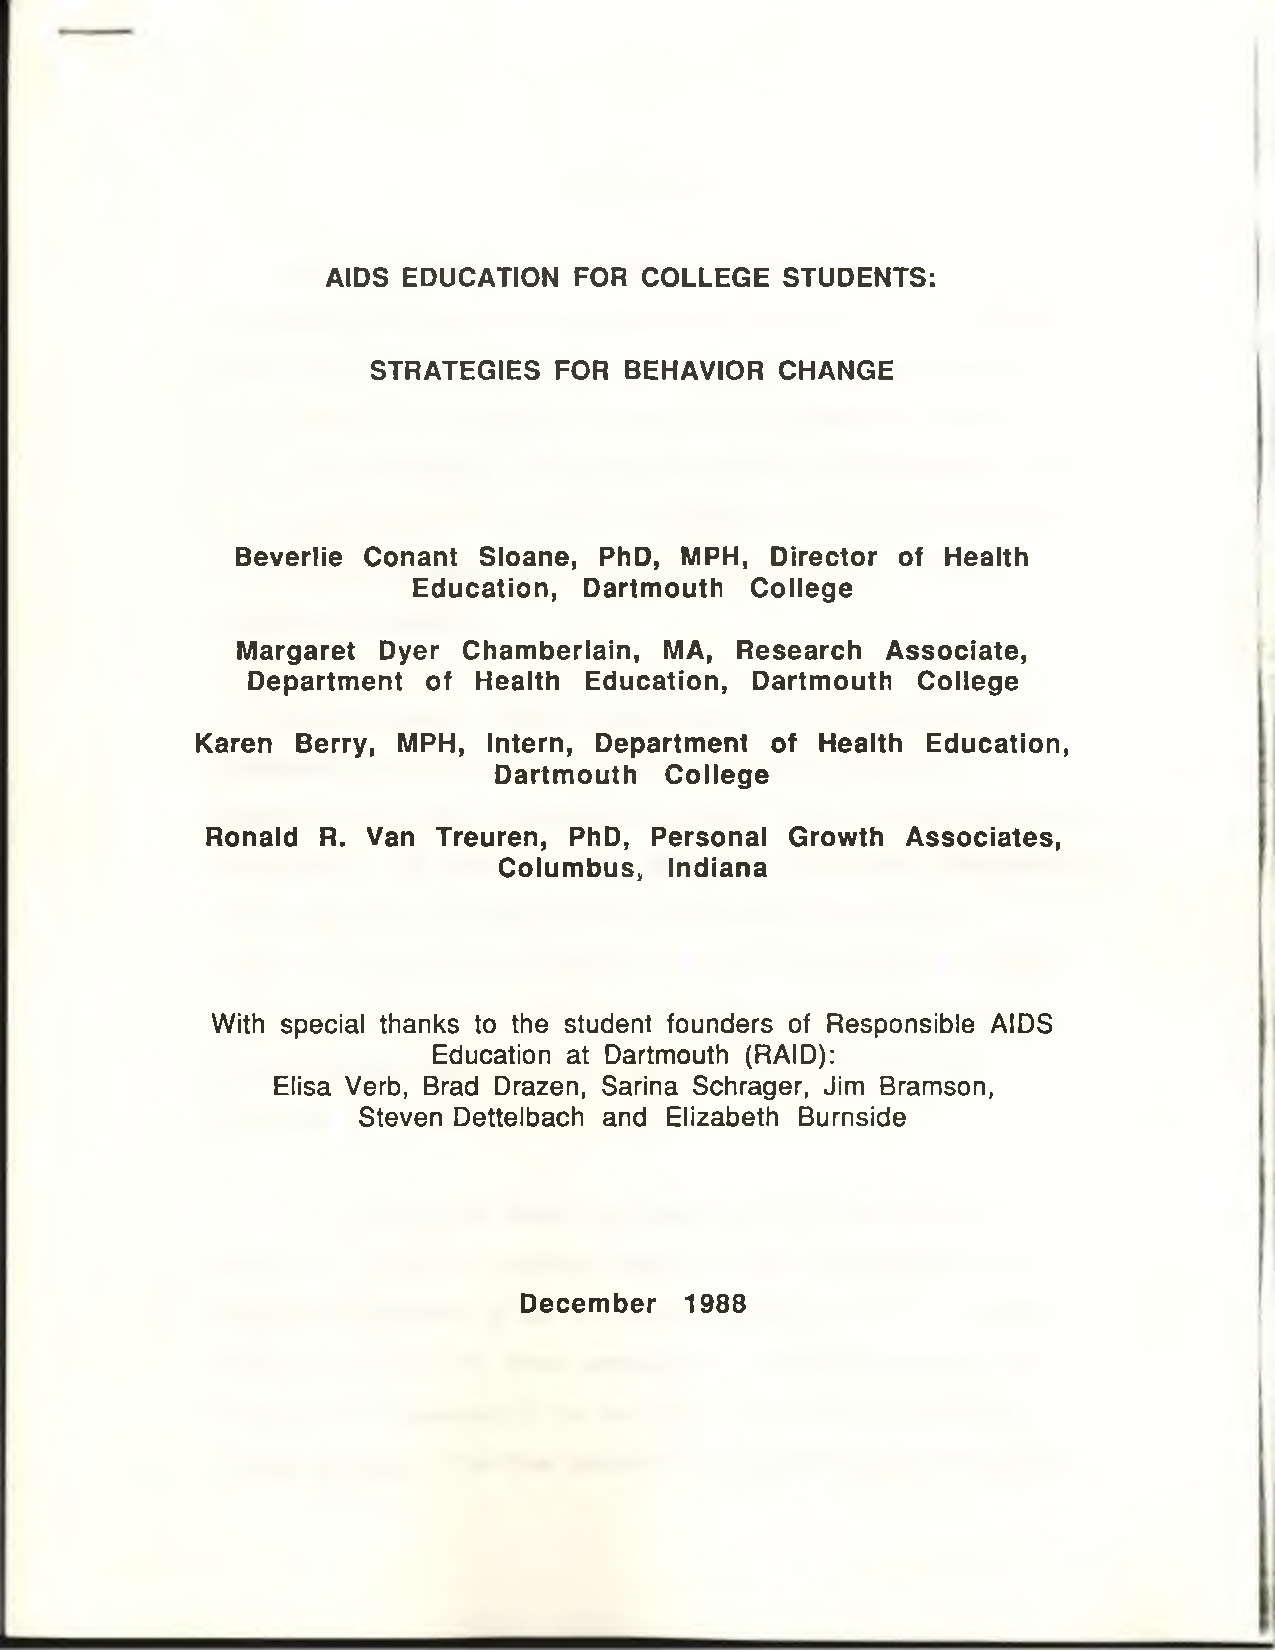 AIDS Education for College Students: Strategies for Behavior Change